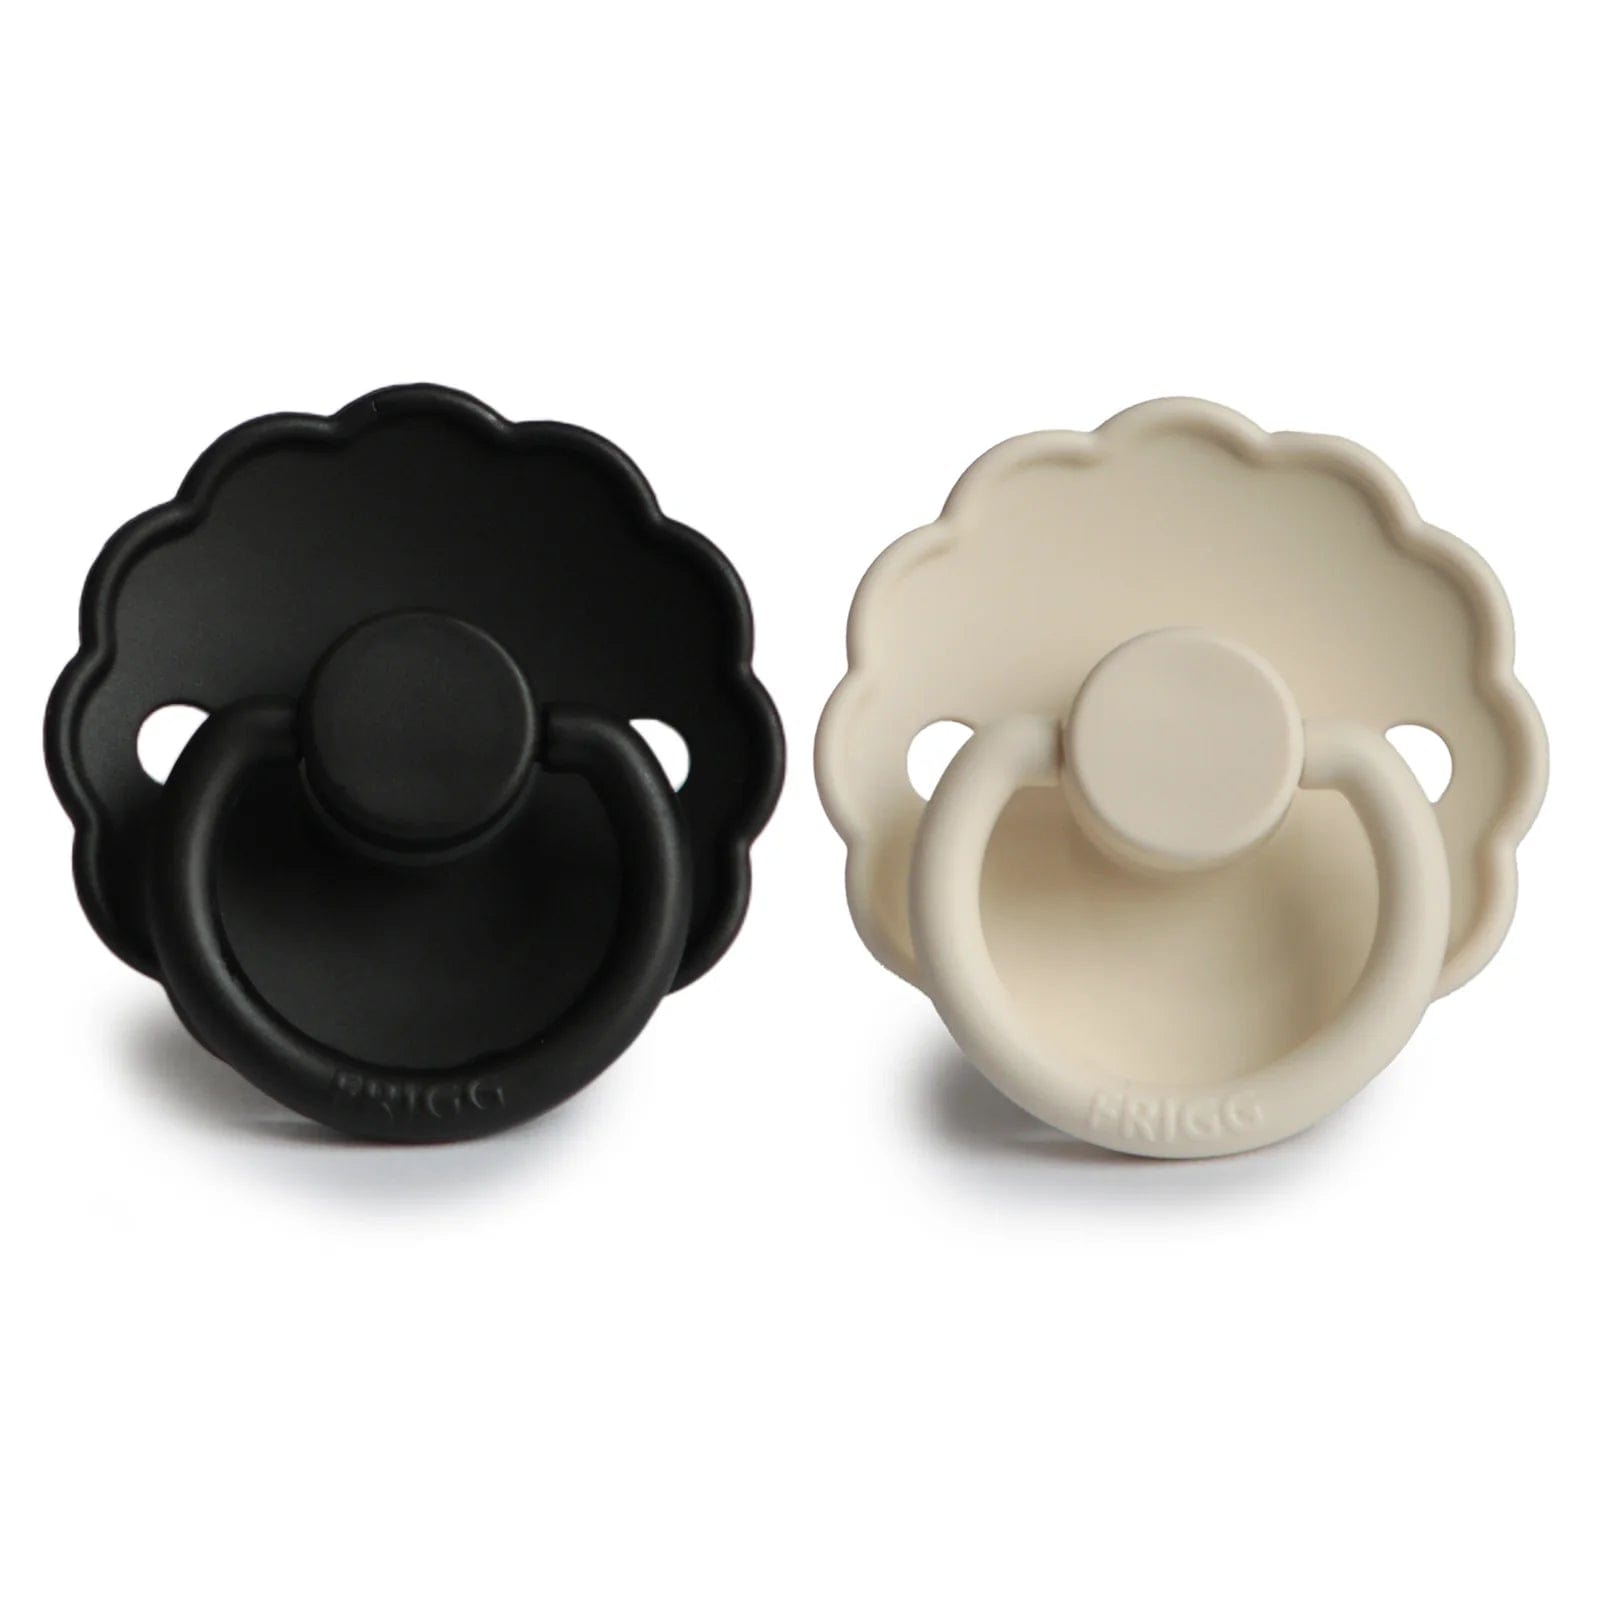 Mushie Soother (Jet Black/Cream) / 0-6 Months / 2 Pack FRIGG Daisy Silicone Baby Pacifier (Jet Black/Cream) 2-Pack